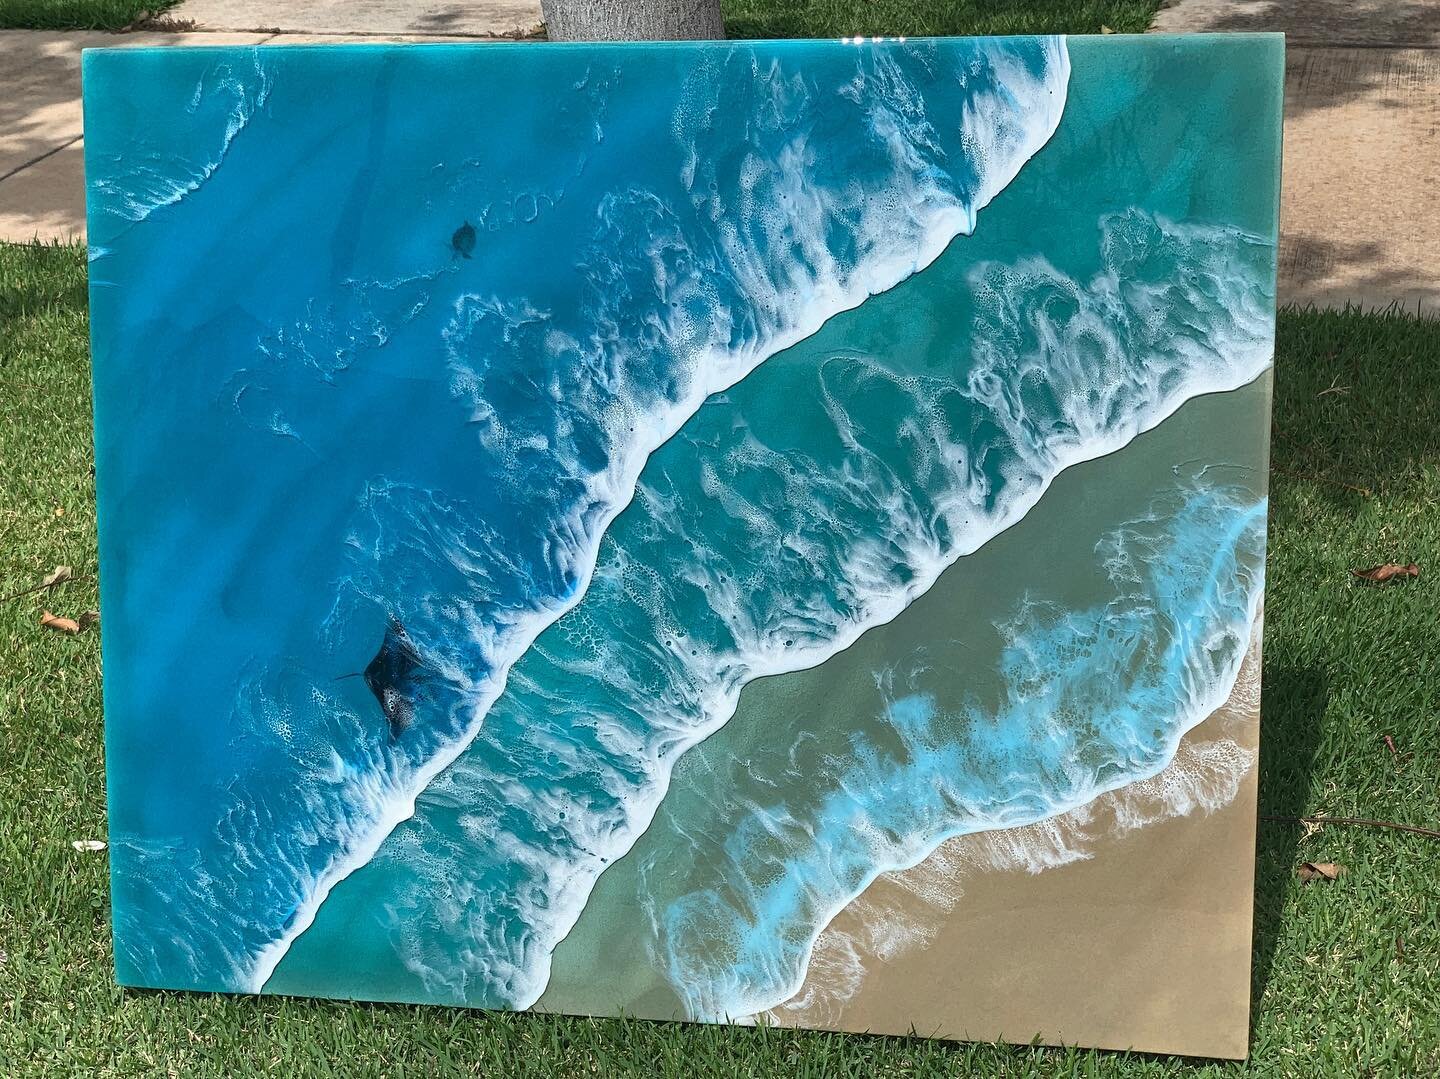 36x30&rdquo; artist panel now available! Perfect Mother&rsquo;s Day surprise. This piece has a wire attached on back and is ready to hang.  Poured with @pro_marine_supplies table top epoxy  Manta and honu by @salty_resin  #waikiki #oahu #hawaii #hale